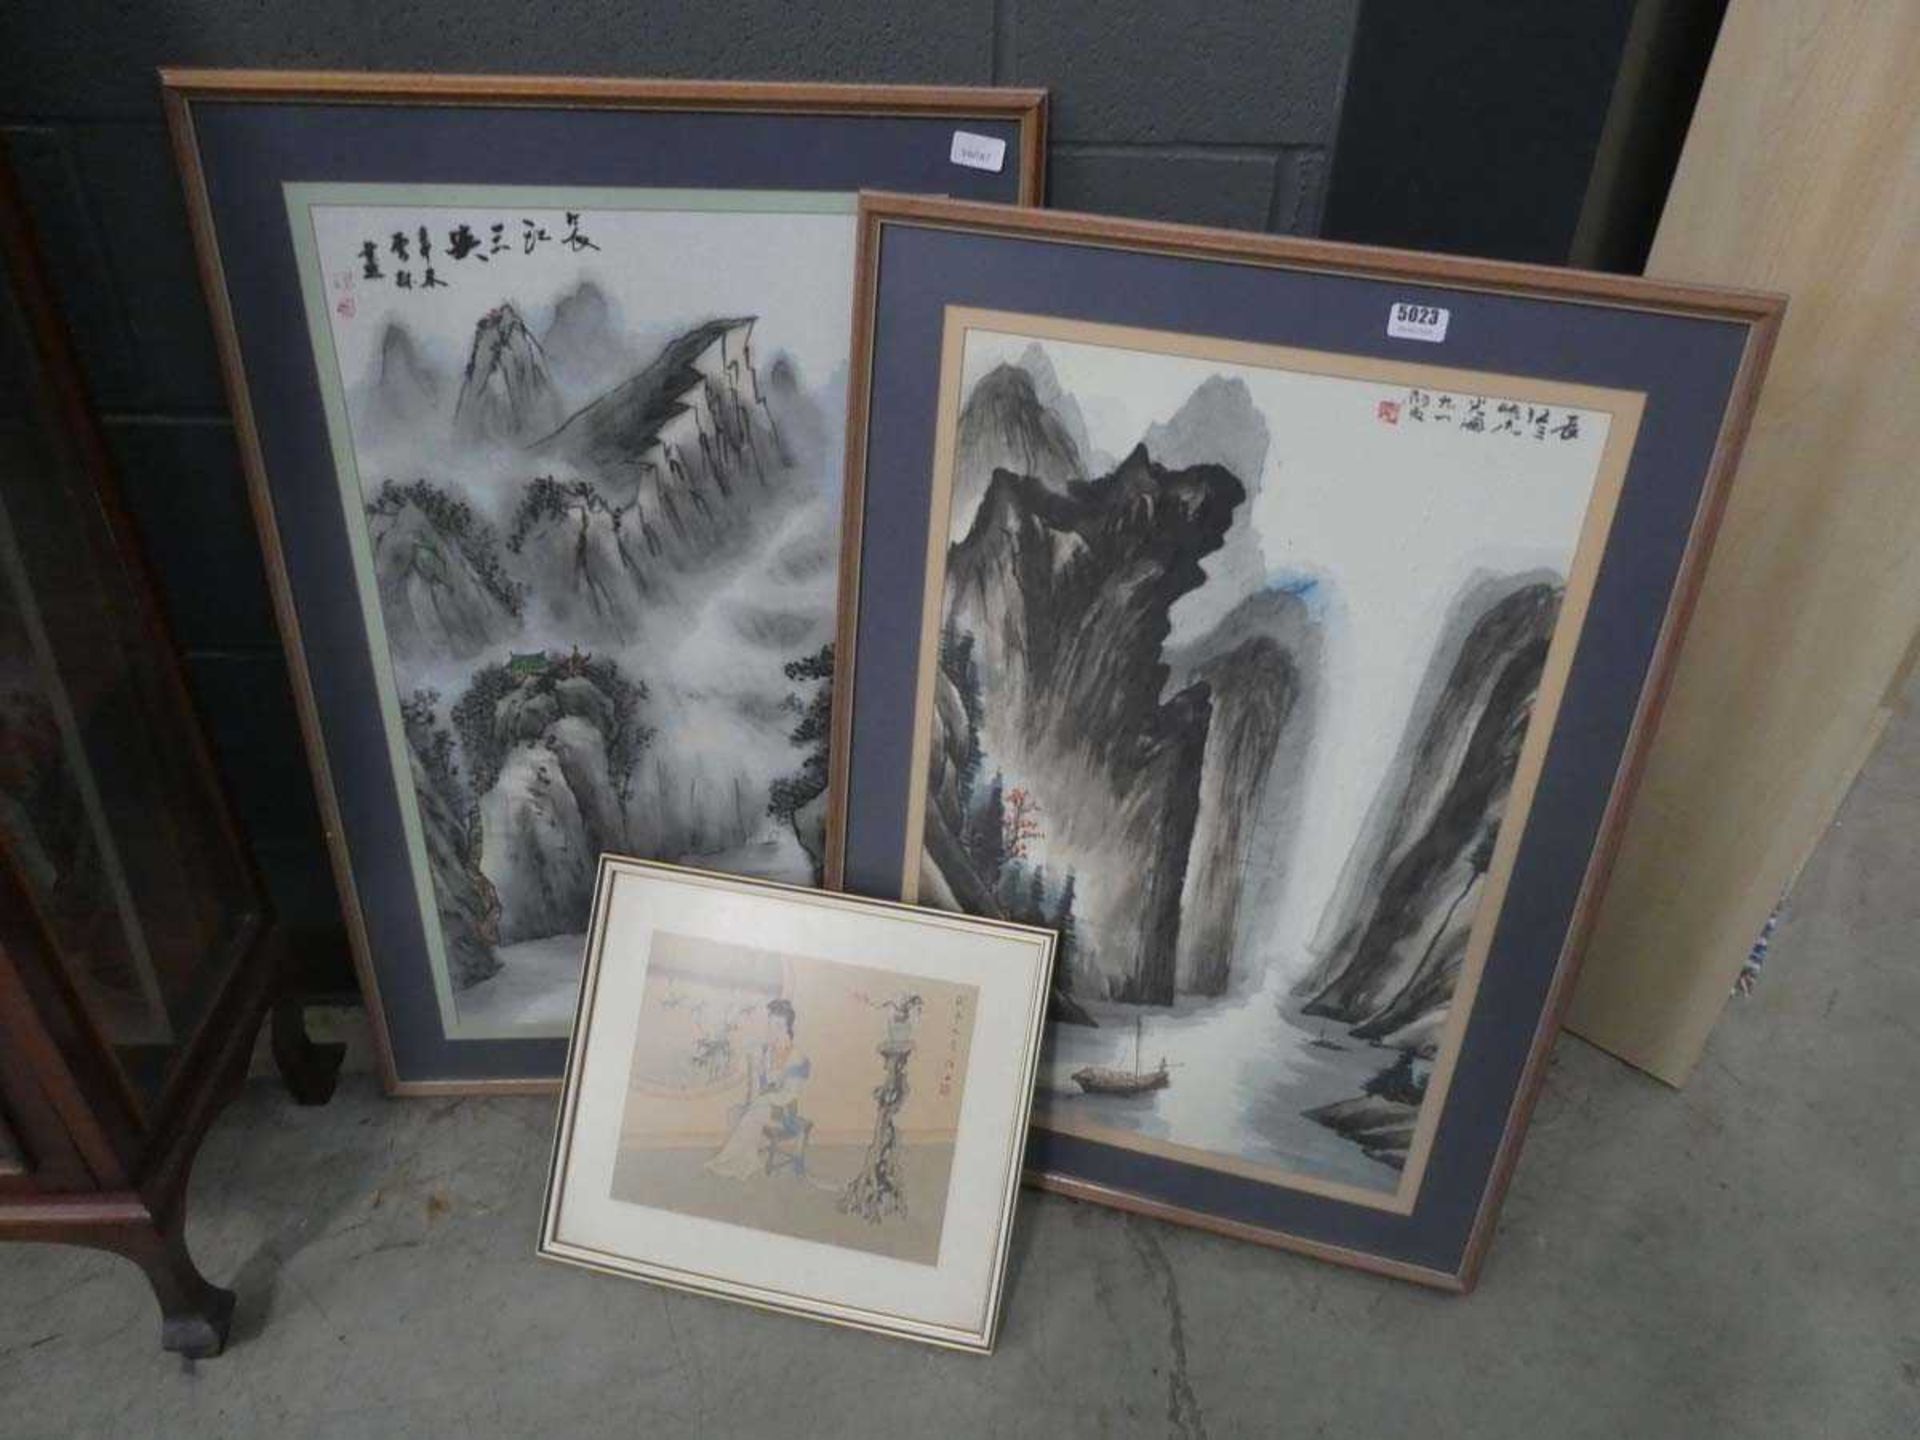 Three Chinese prints, figure in room, plus misty mountains